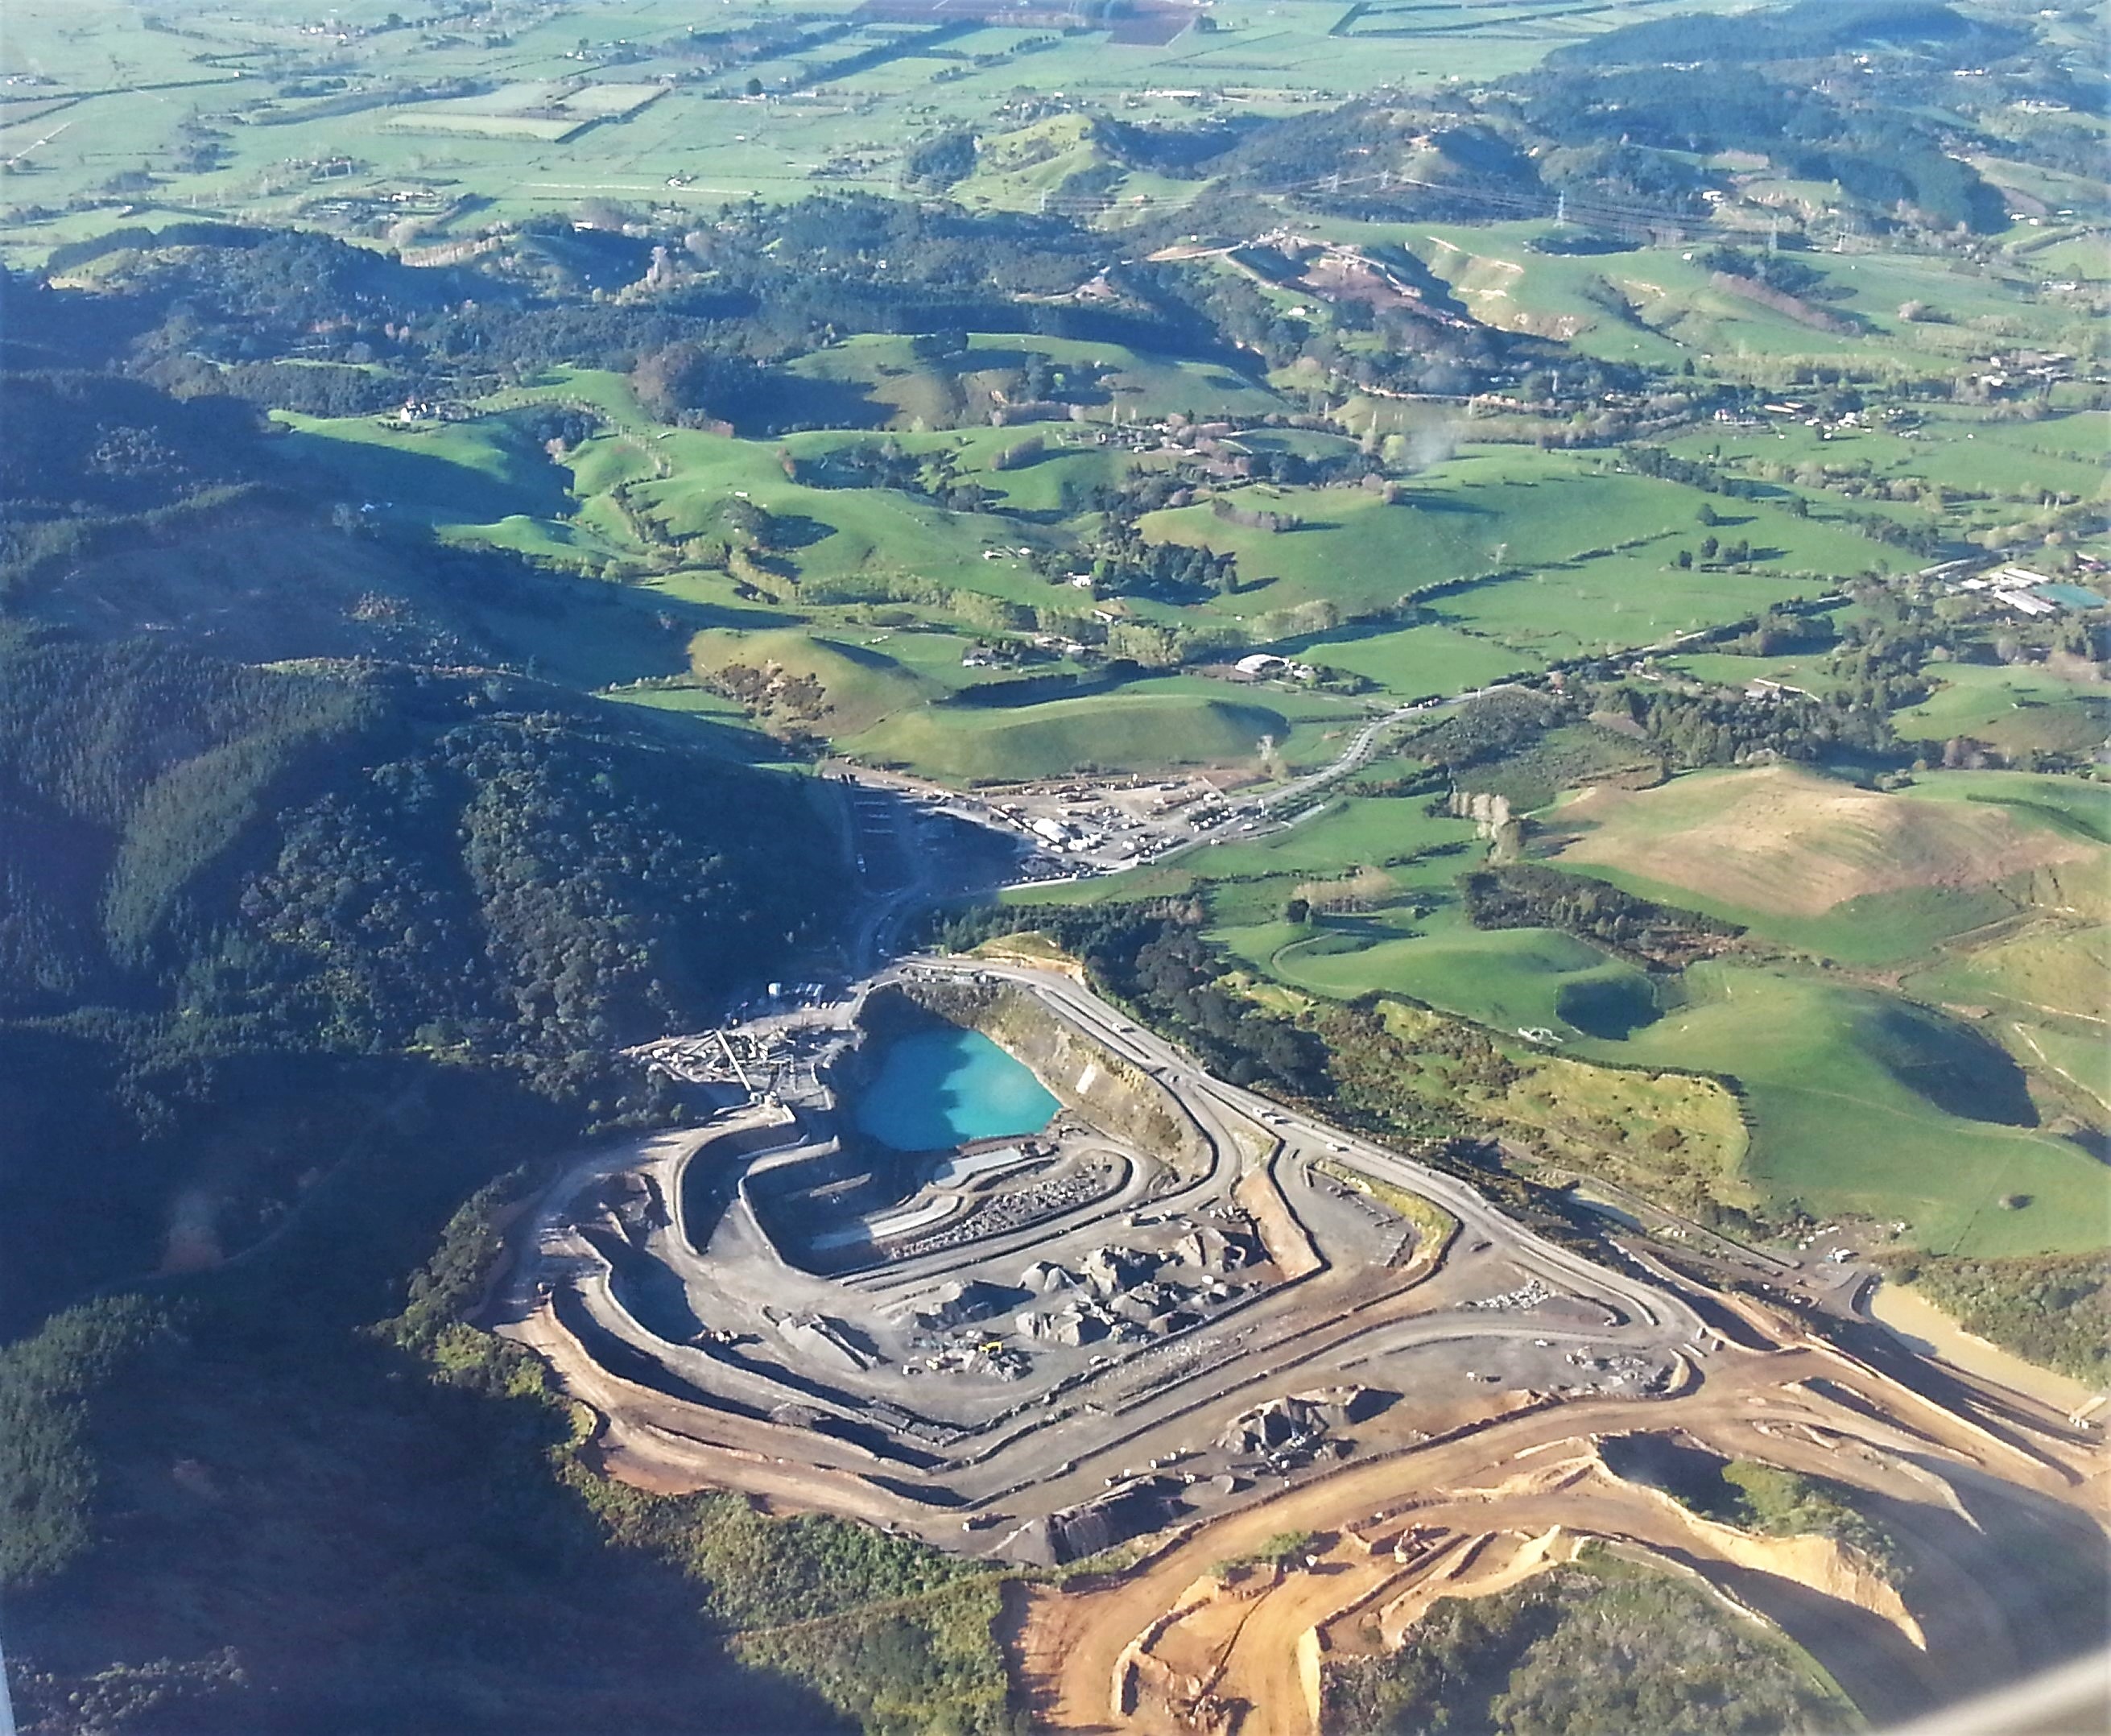 Conservation land mining ban a risk to building materials